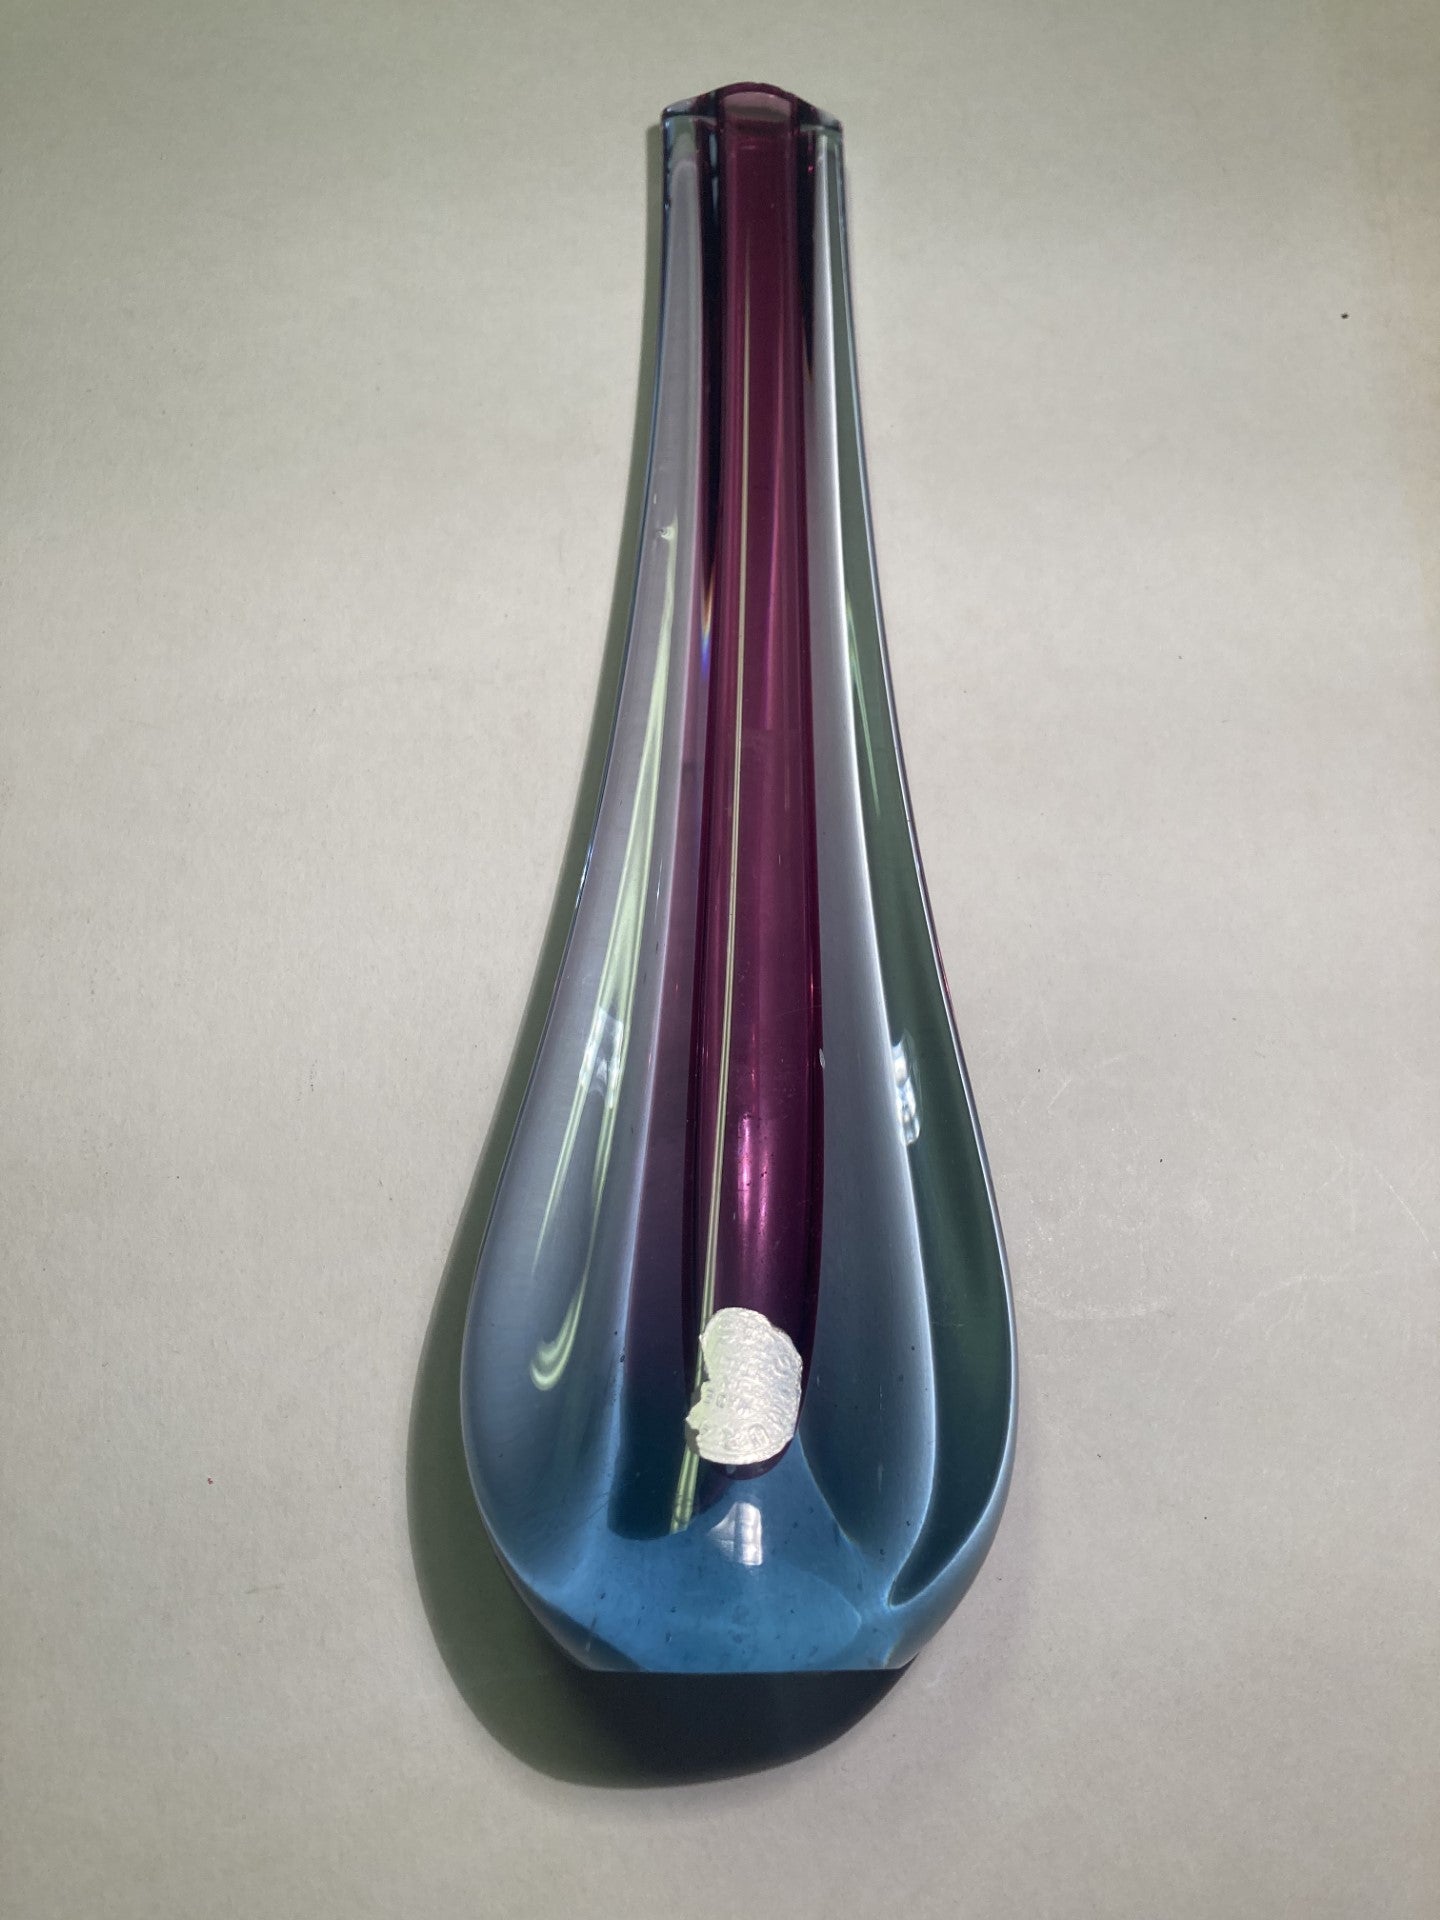 Beautiful Murano glass vase from approx. 1950 - No. 01191